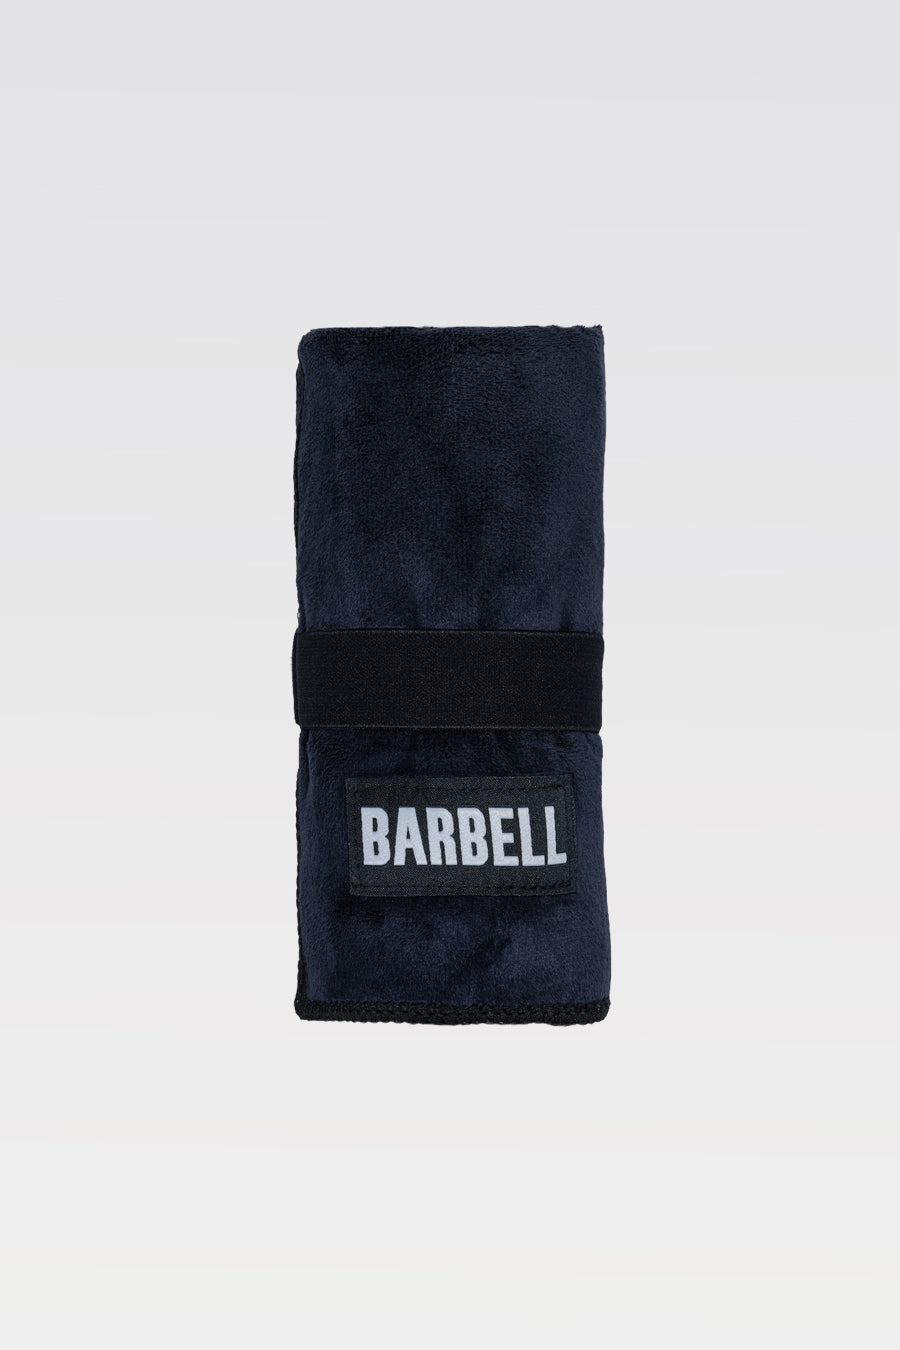 Barbell Gym Towel – Barbell Apparel